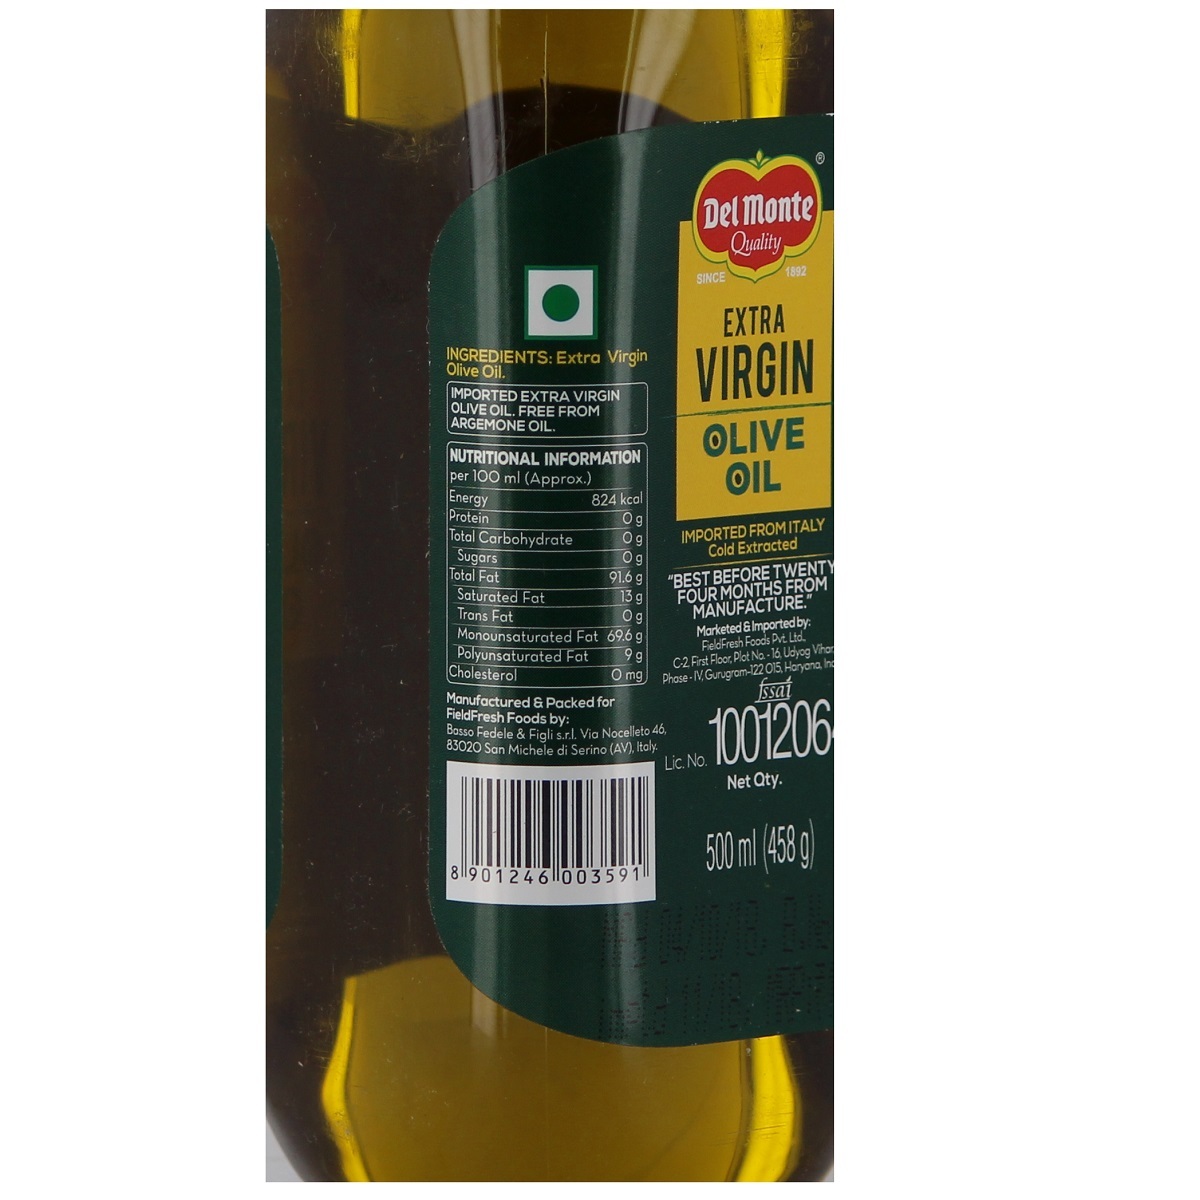 Delmonte Quality Extra Virgin Olive Oil 500ml